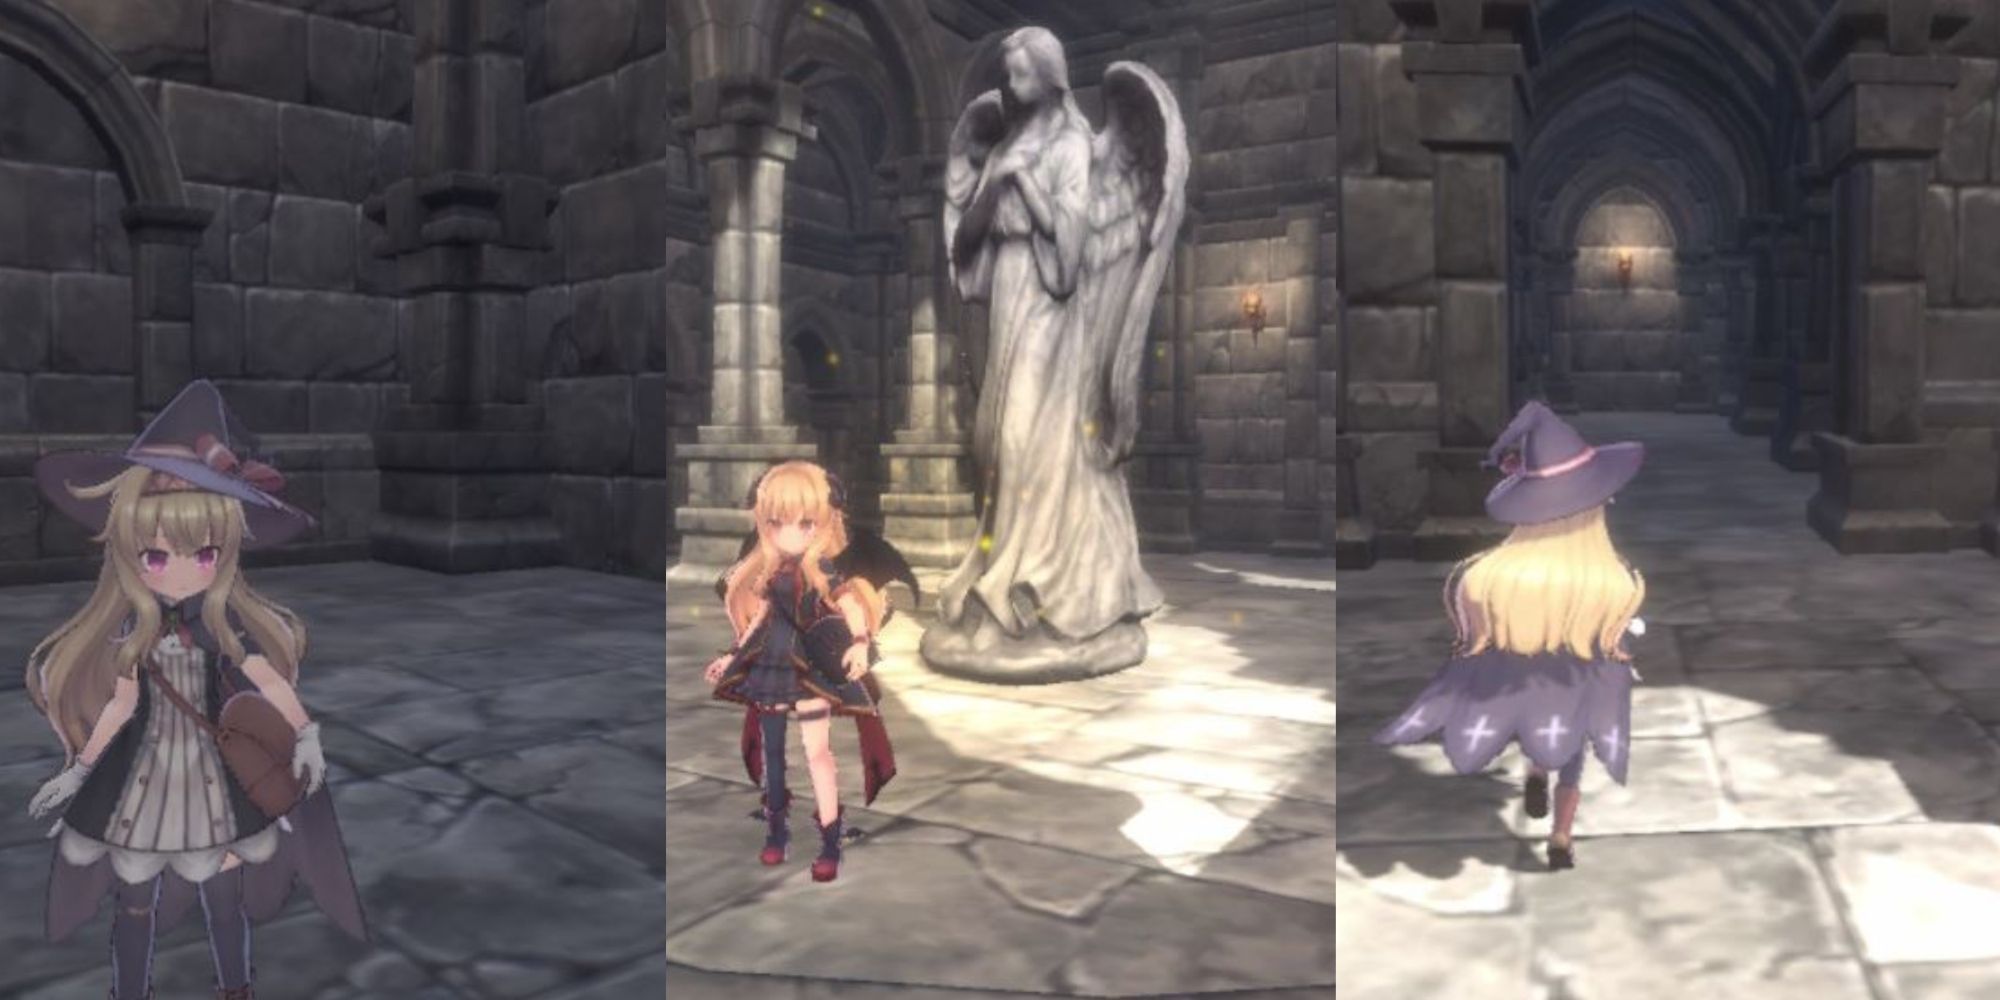 A collage of Nobeta standing in the Okun Shrine and near a Goddess Statue in Little Witch Nobeta.